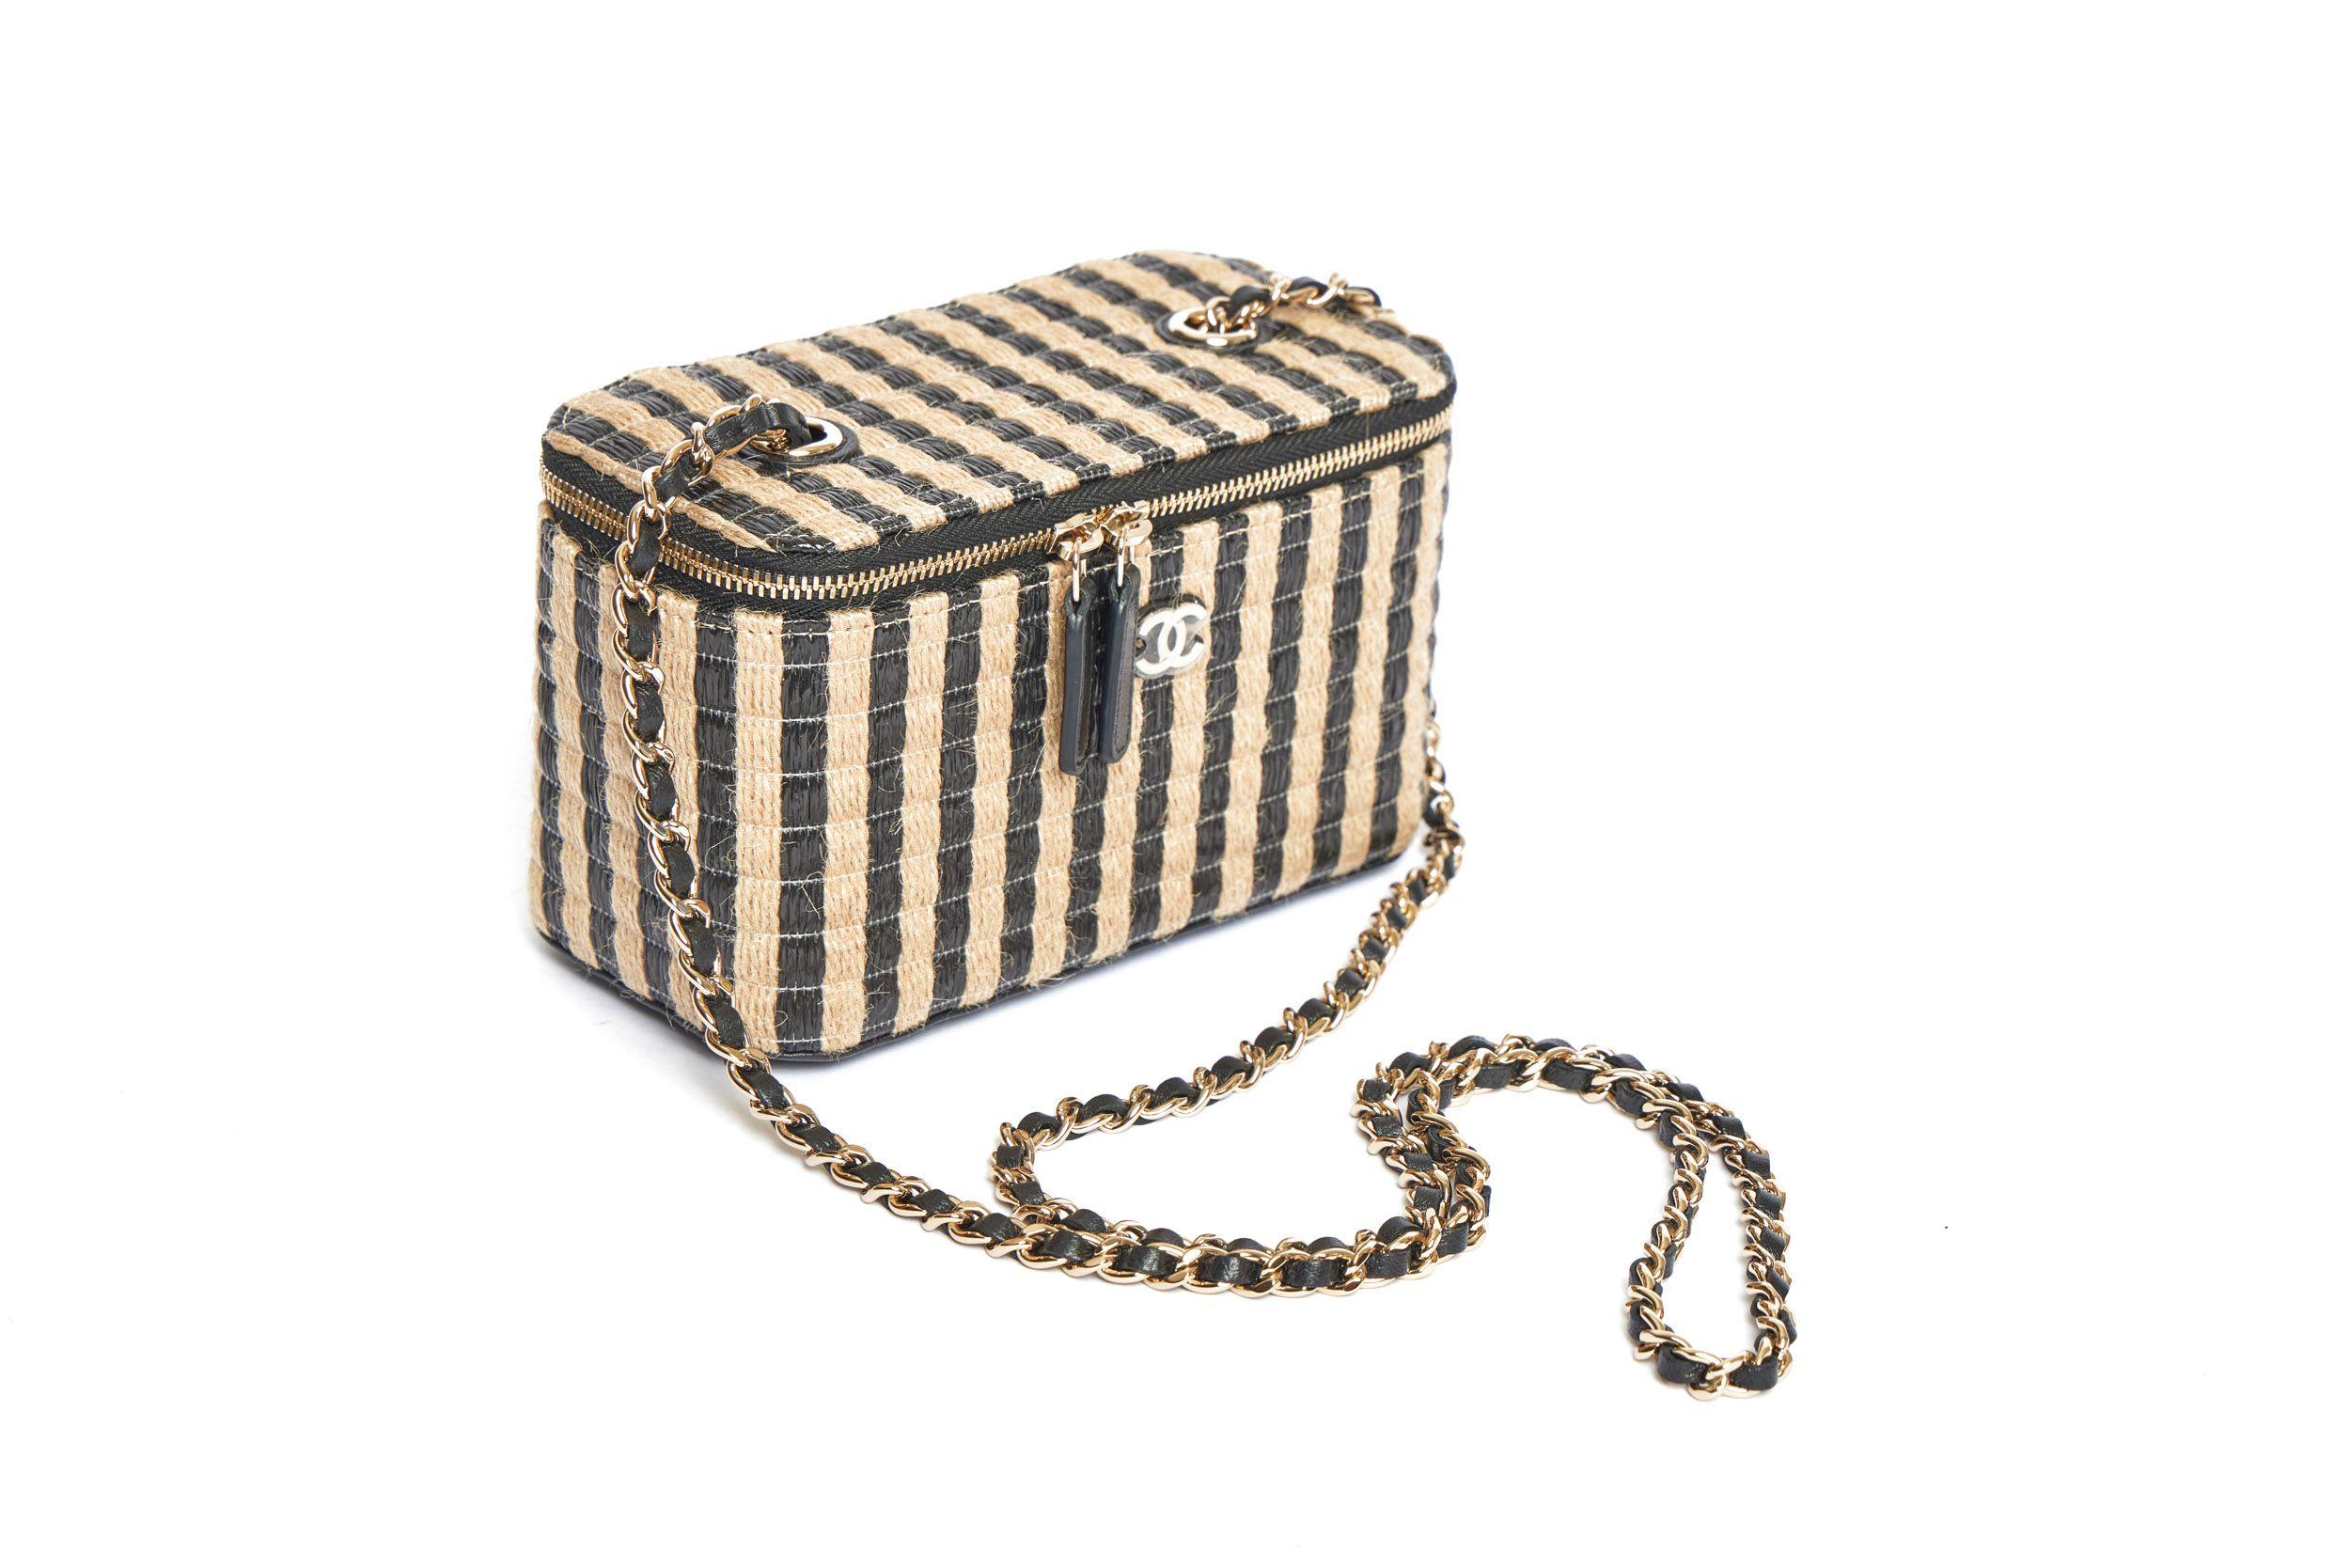 Mini Chanel Raffia Vanity bag with black stripes from the 2020 collection. It’s a crossbody bag and the shoulder drop of the leather-threaded gold chain is 22’. On front of the bag is a small CC logo which is still covered in plastic. The interior